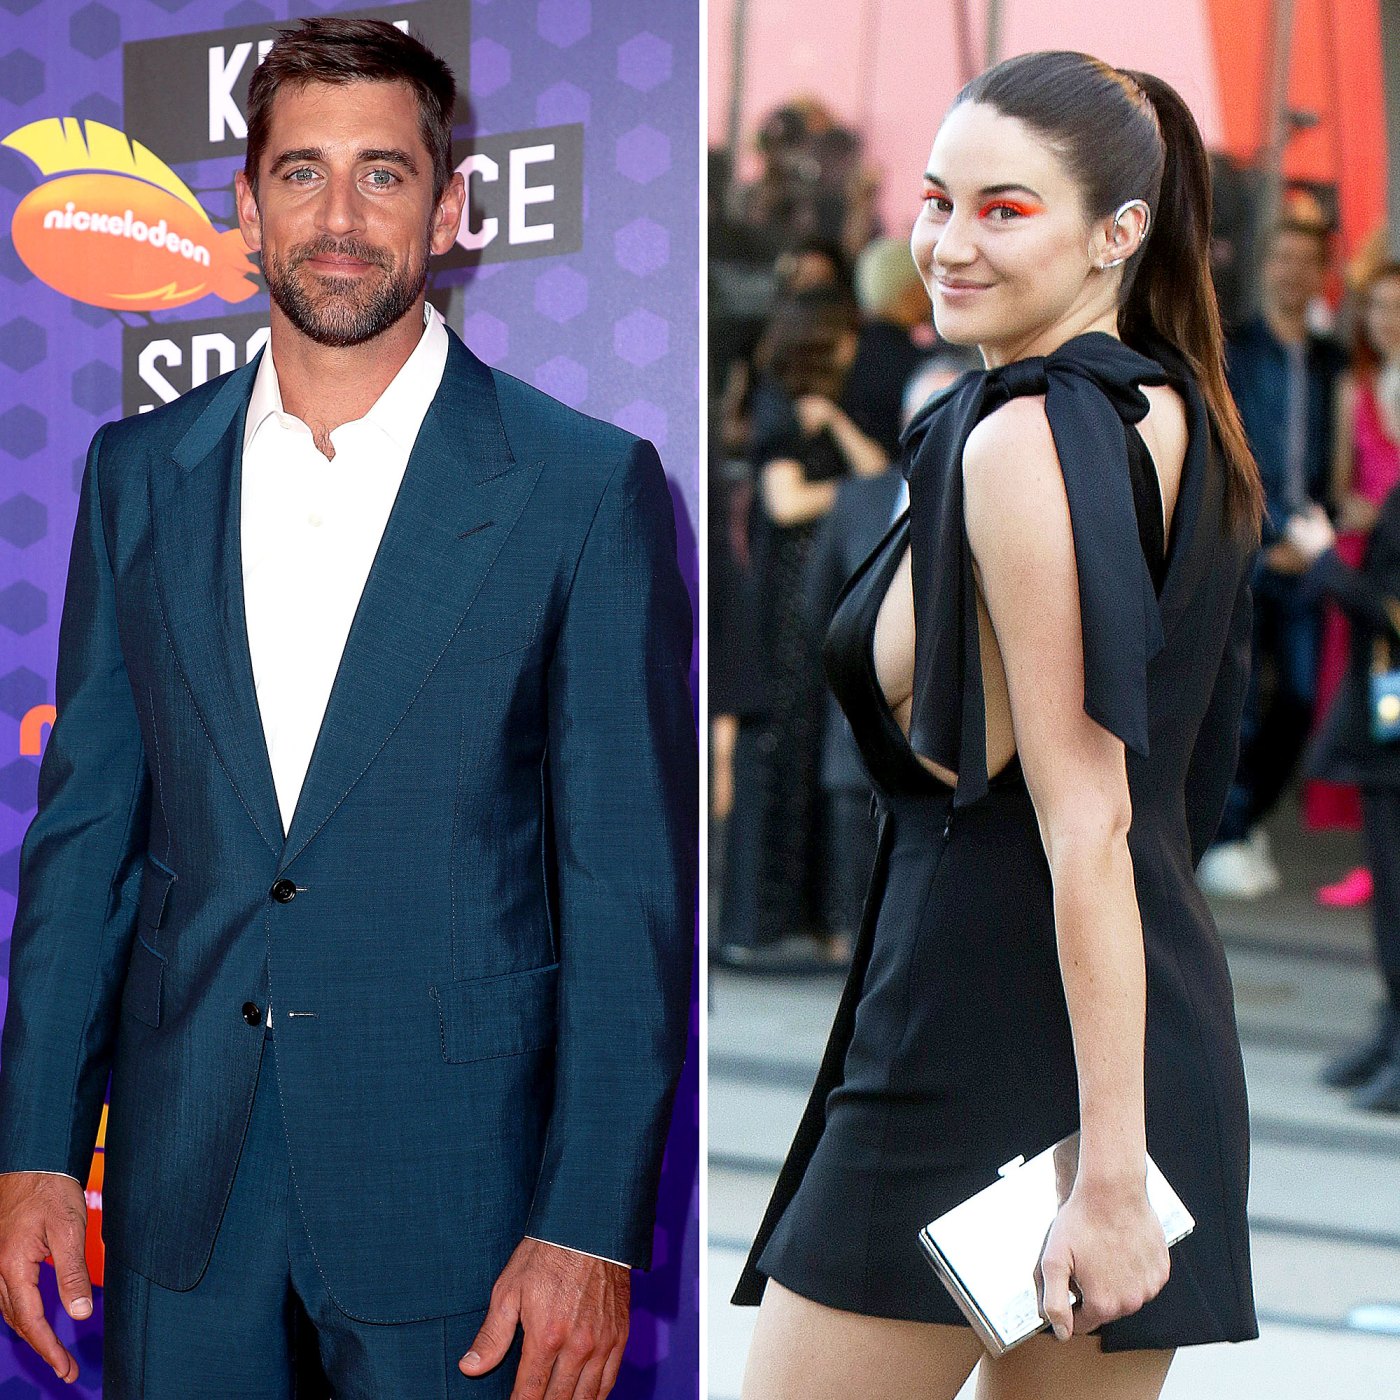 Aaron Rodgers, Shailene Woodley Hold Hands in Cute Photo